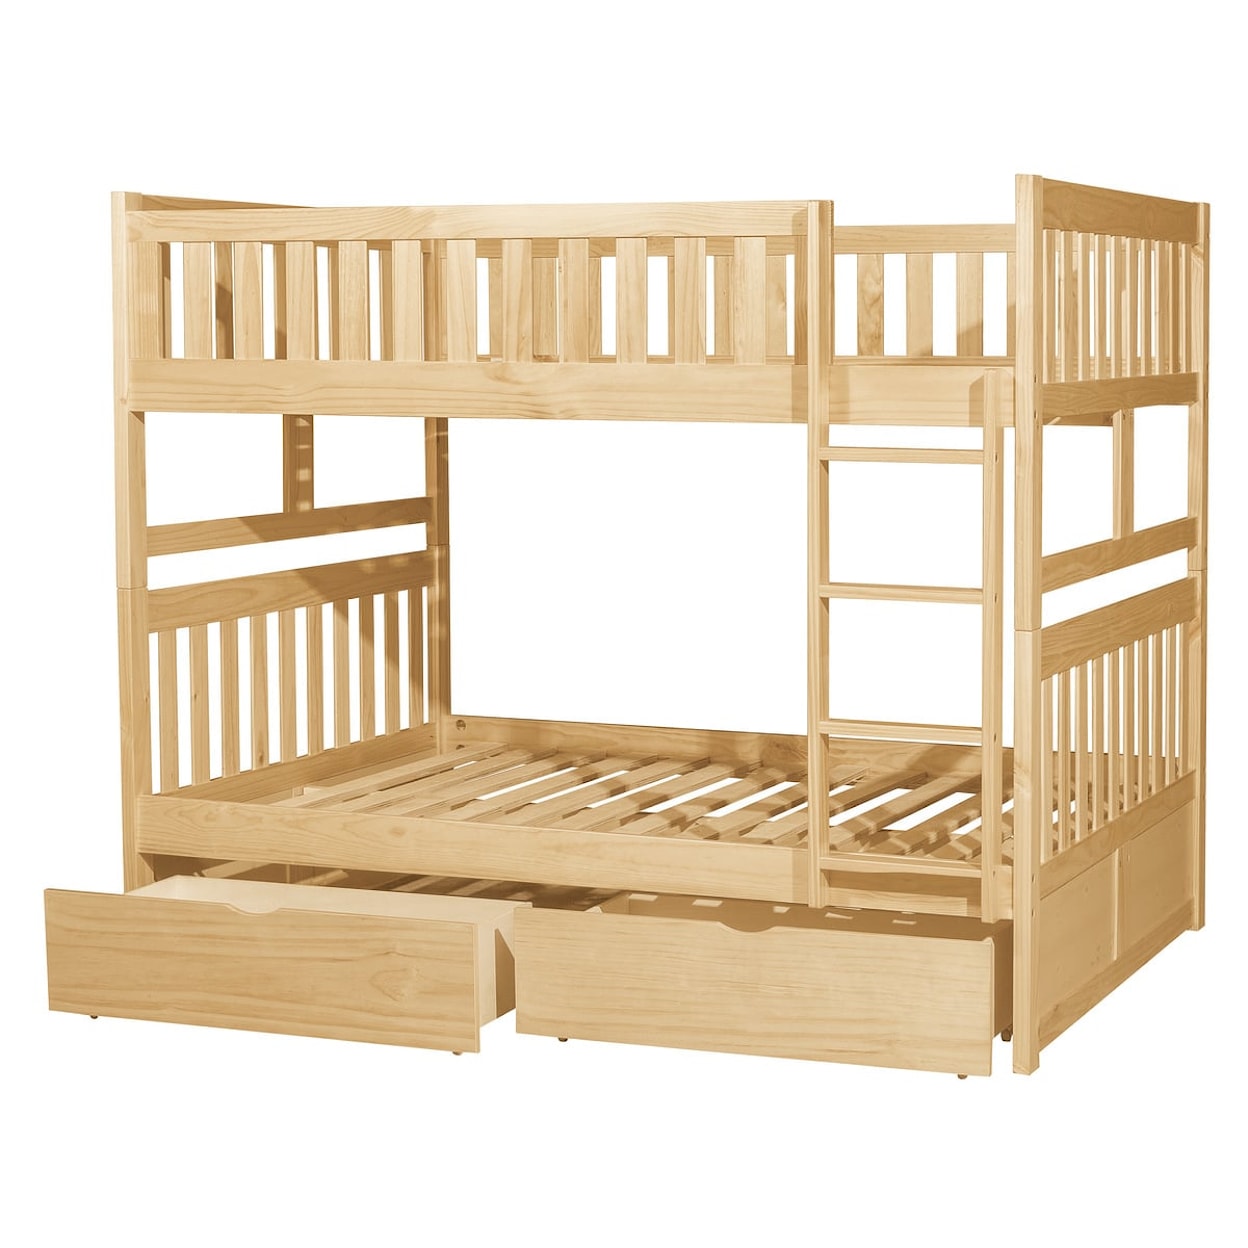 Homelegance Bartly Full/Full Bunk Bed with Storage Boxes